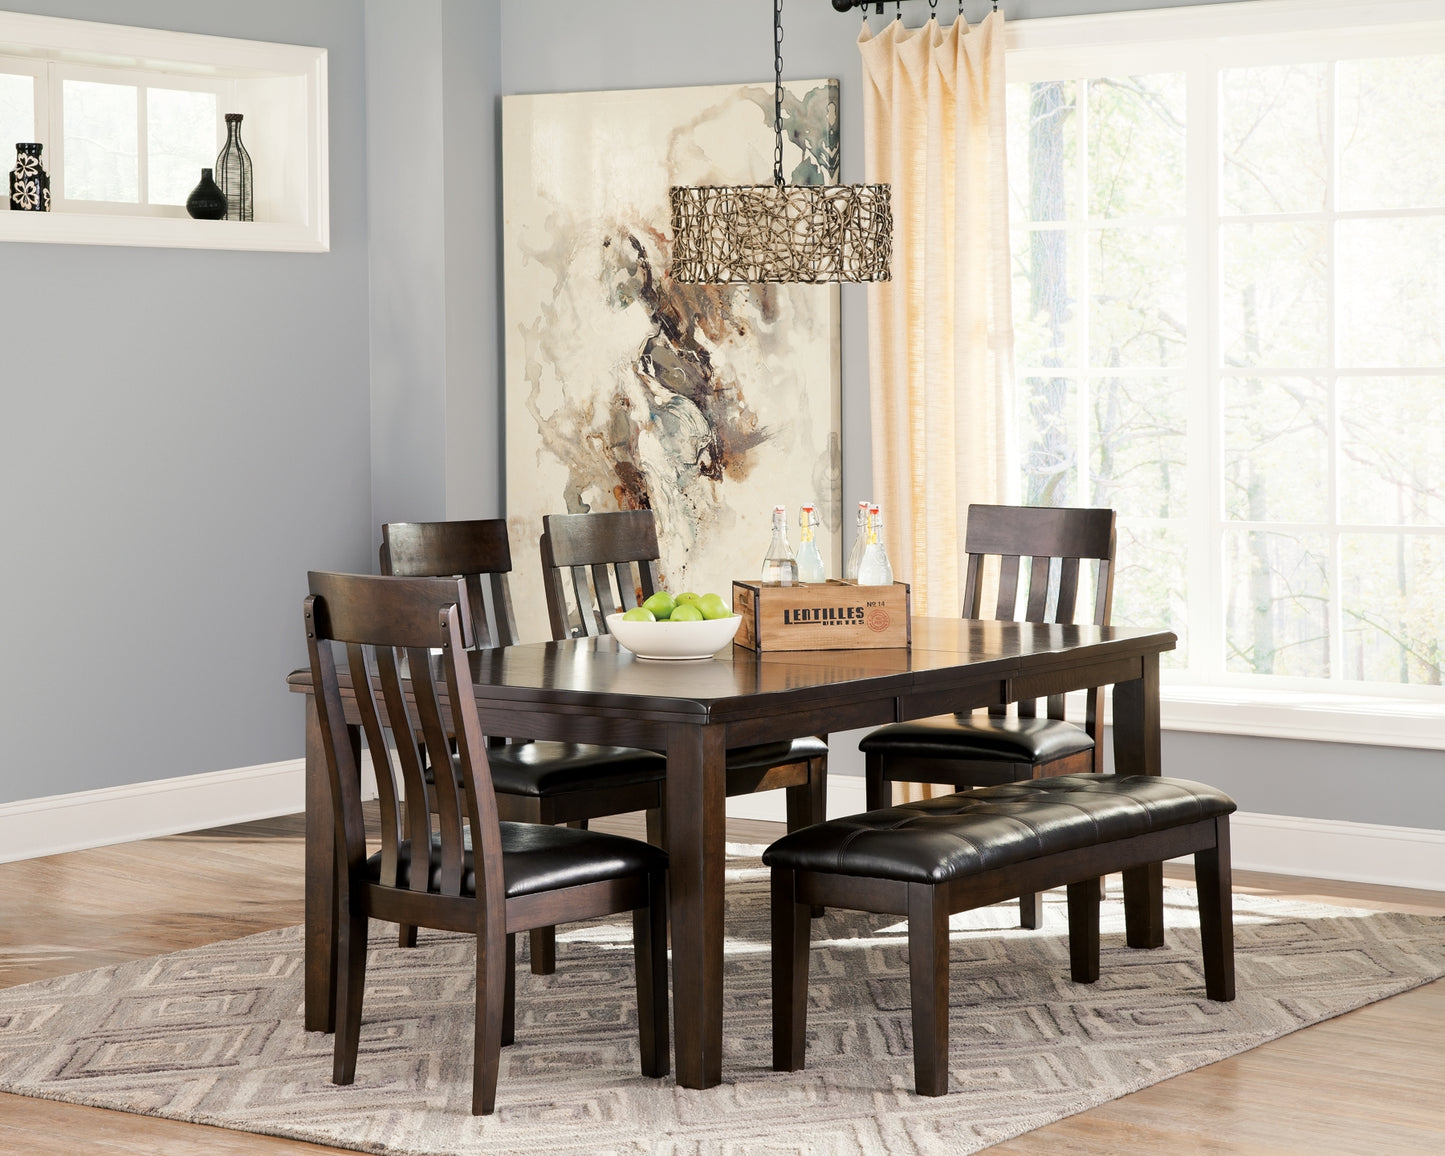 Haddigan Dining Table and 4 Chairs and Bench Wilson Furniture (OH)  in Bridgeport, Ohio. Serving Bridgeport, Yorkville, Bellaire, & Avondale